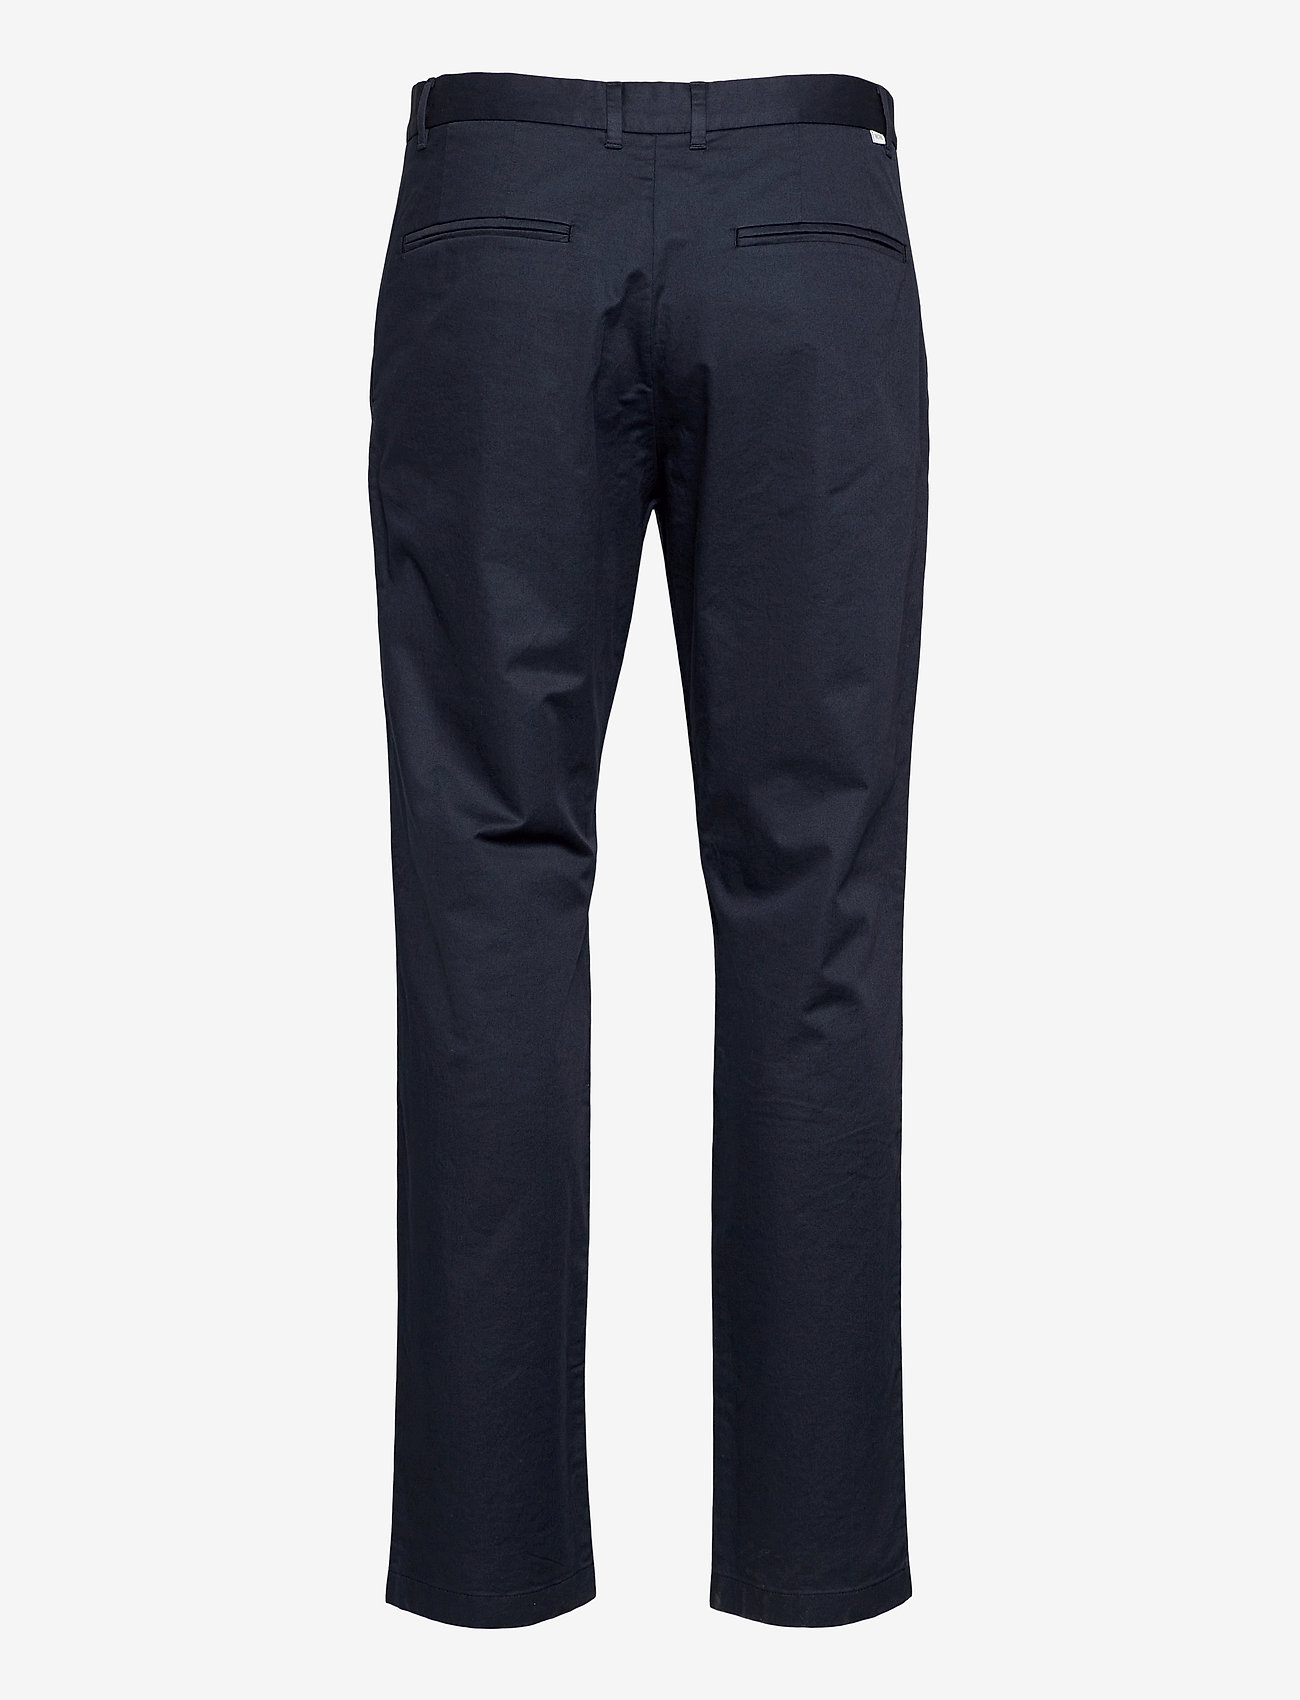 Wood Wood - Marcus light twill trousers - chinot - navy - 1